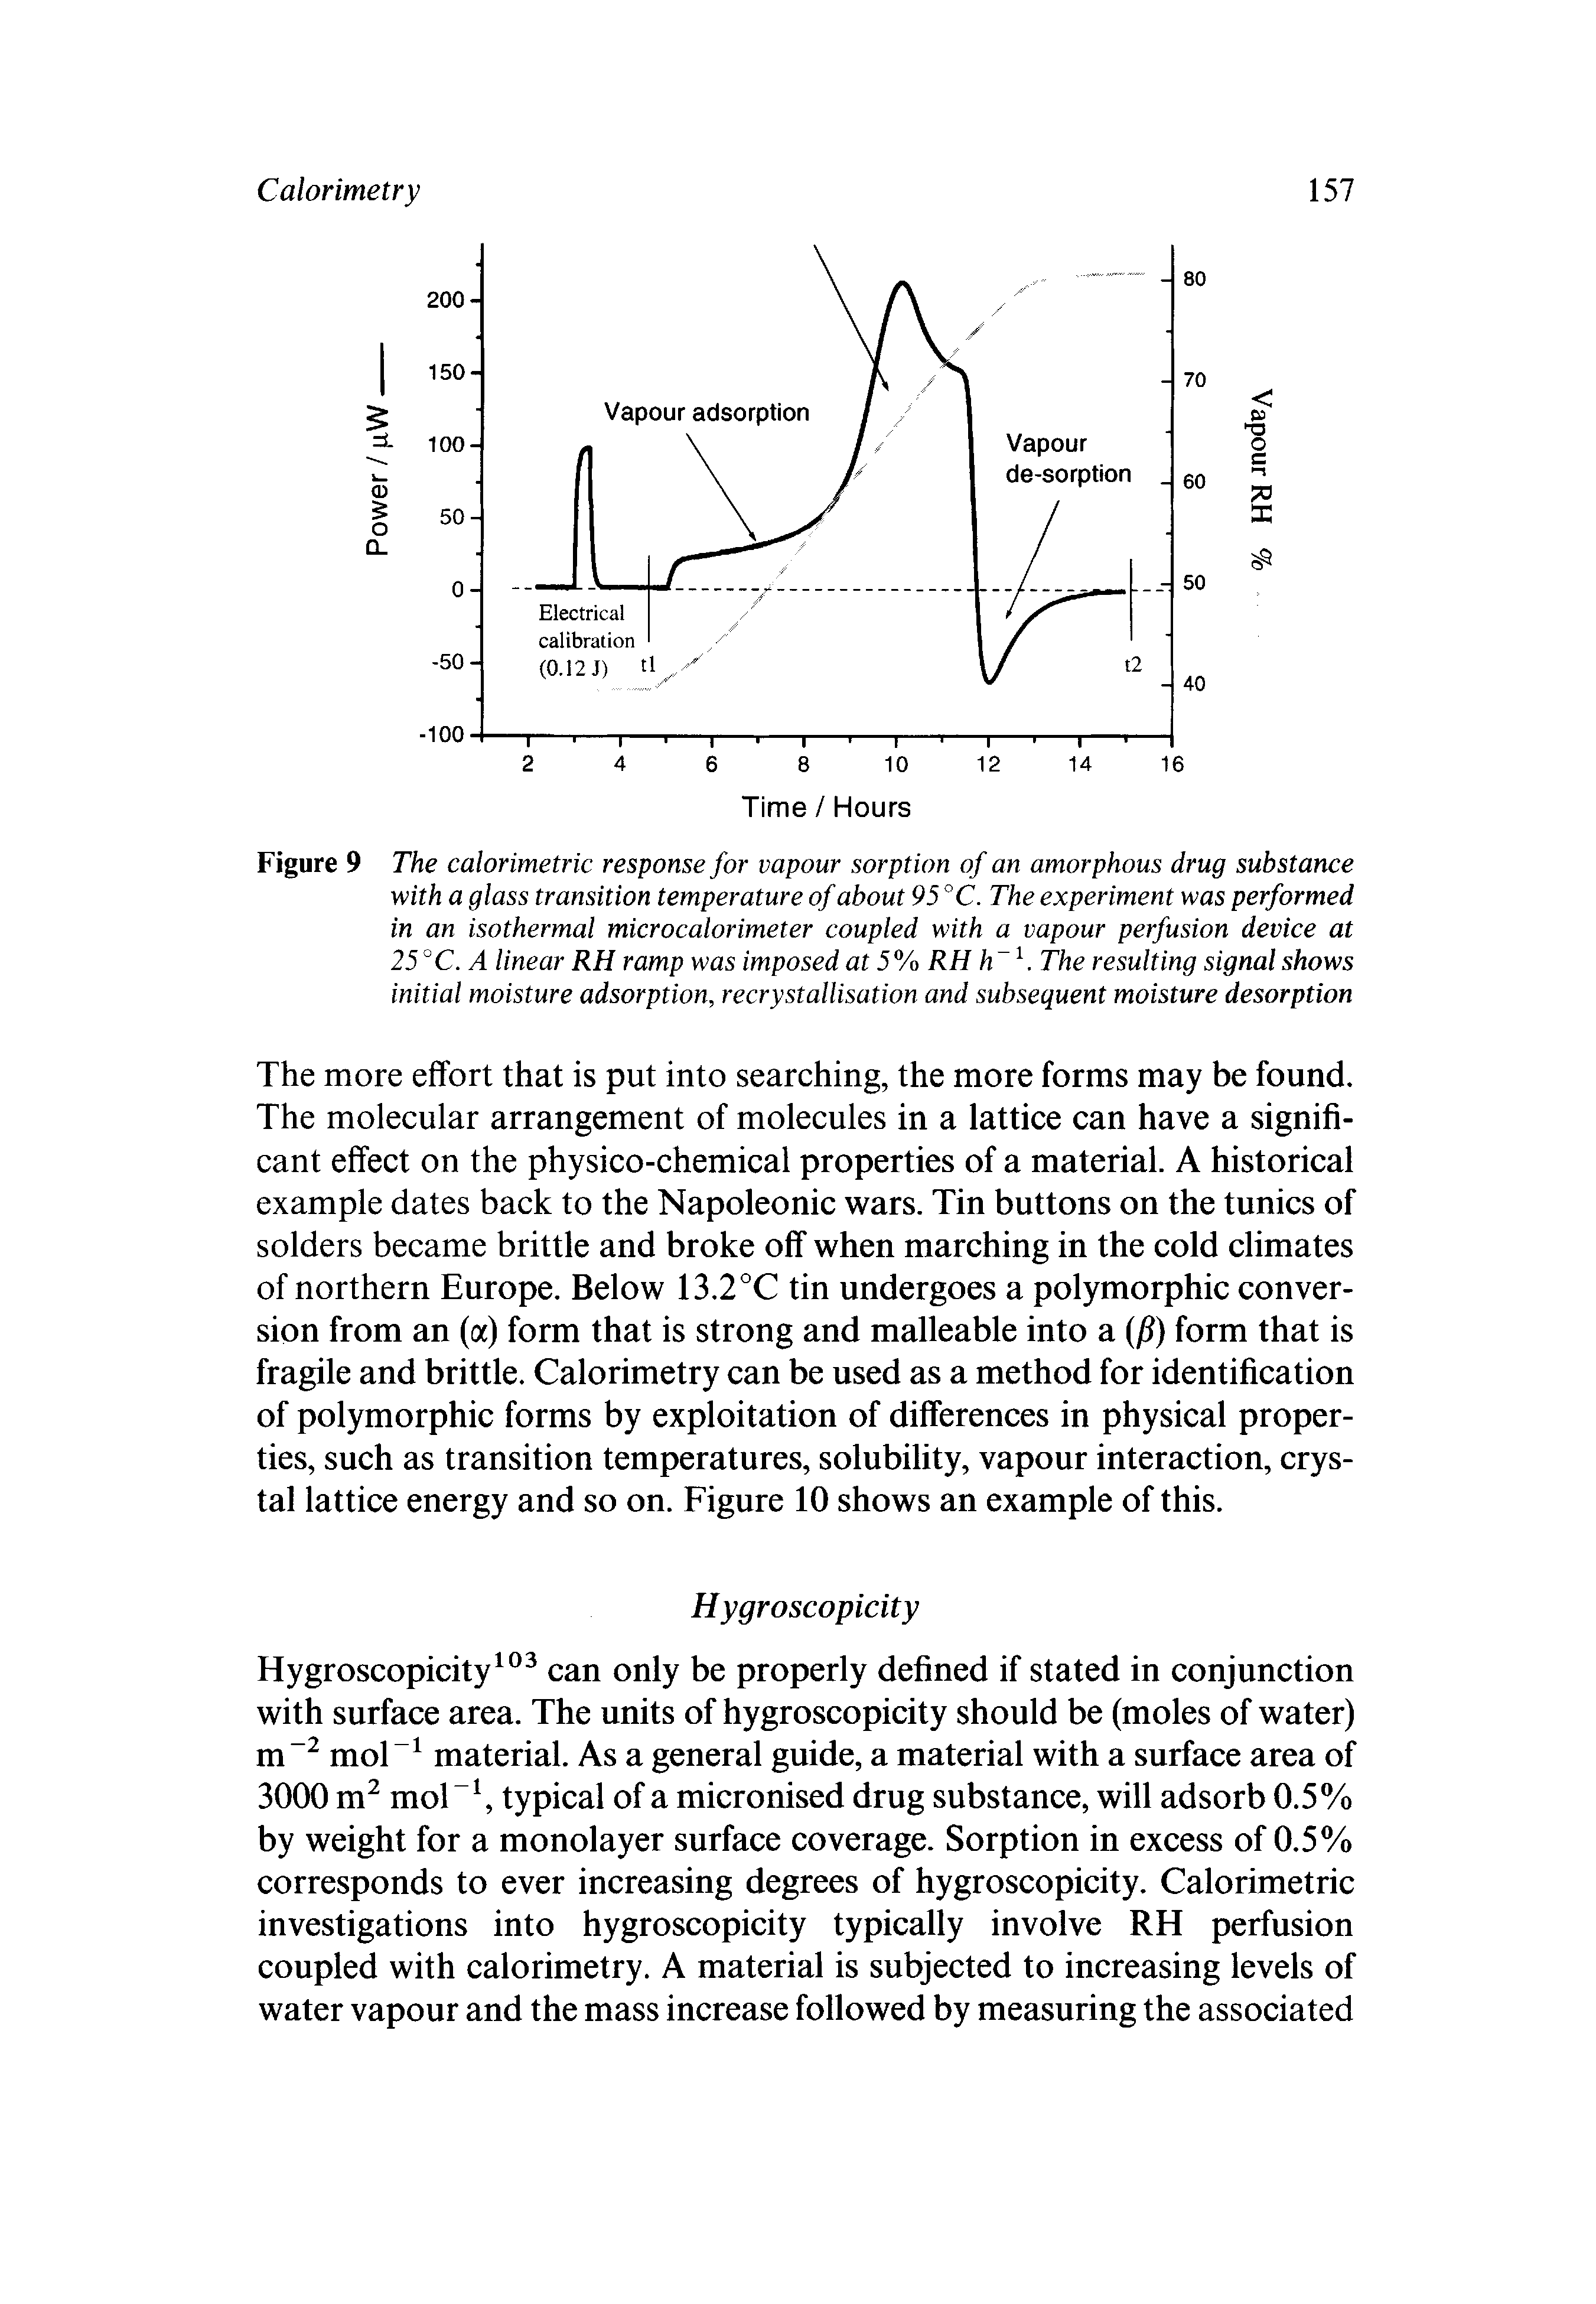 Figure 9 The calorimetric response for vapour sorption of an amorphous drug substance with a glass transition temperature of about 95 °C. The experiment was performed in an isothermal microcalorimeter coupled with a vapour perfusion device at 25°C. A linear RH ramp was imposed at 5% RH h. The resulting signal shows initial moisture adsorption, recrystallisation and subsequent moisture desorption...